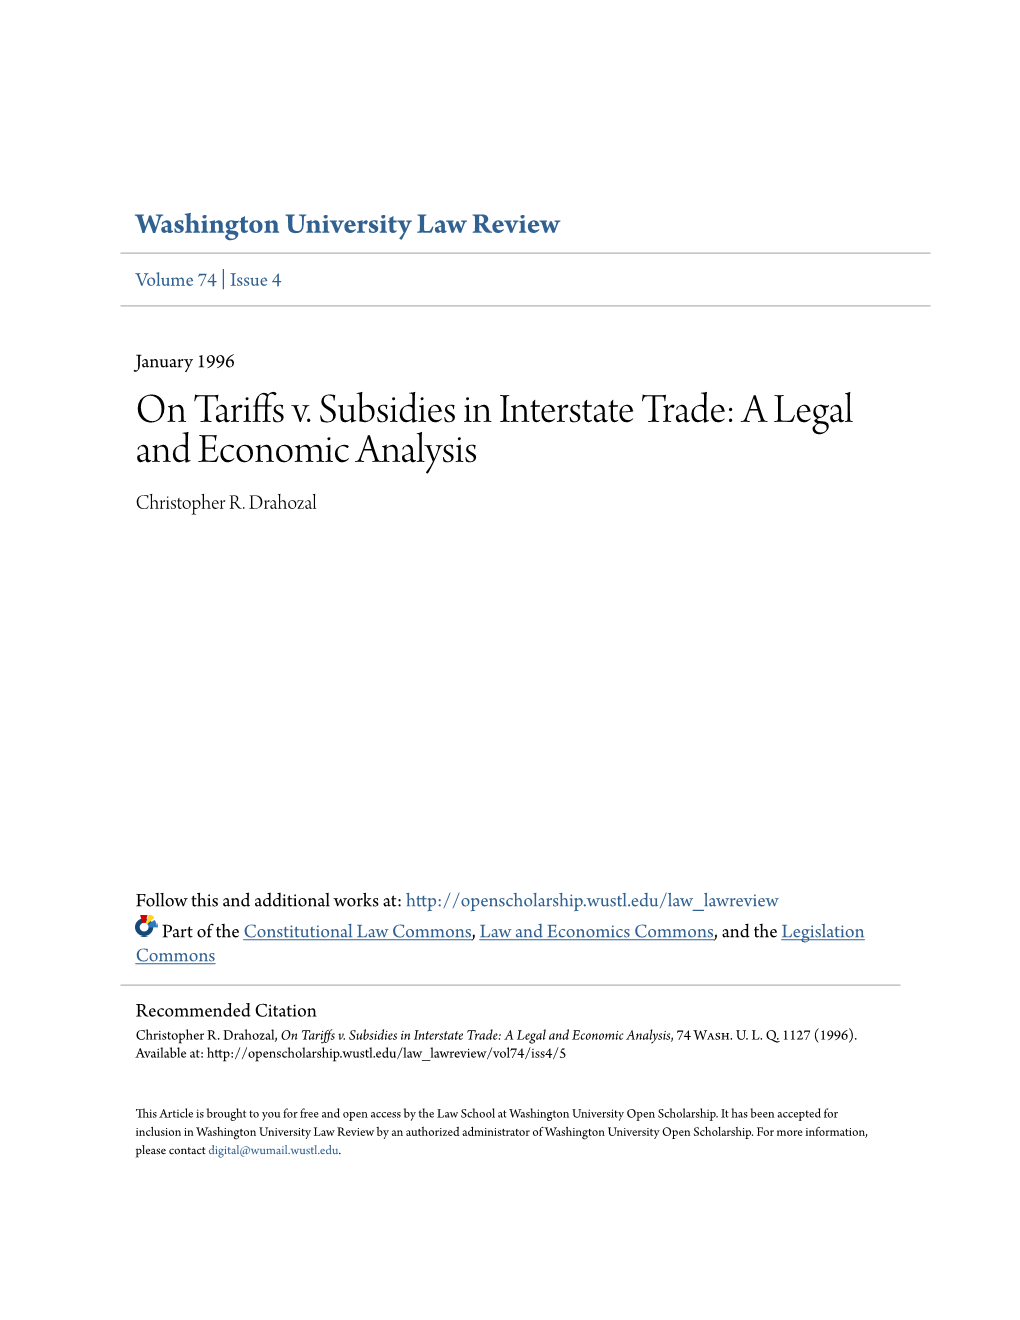 On Tariffs V. Subsidies in Interstate Trade: a Legal and Economic Analysis Christopher R